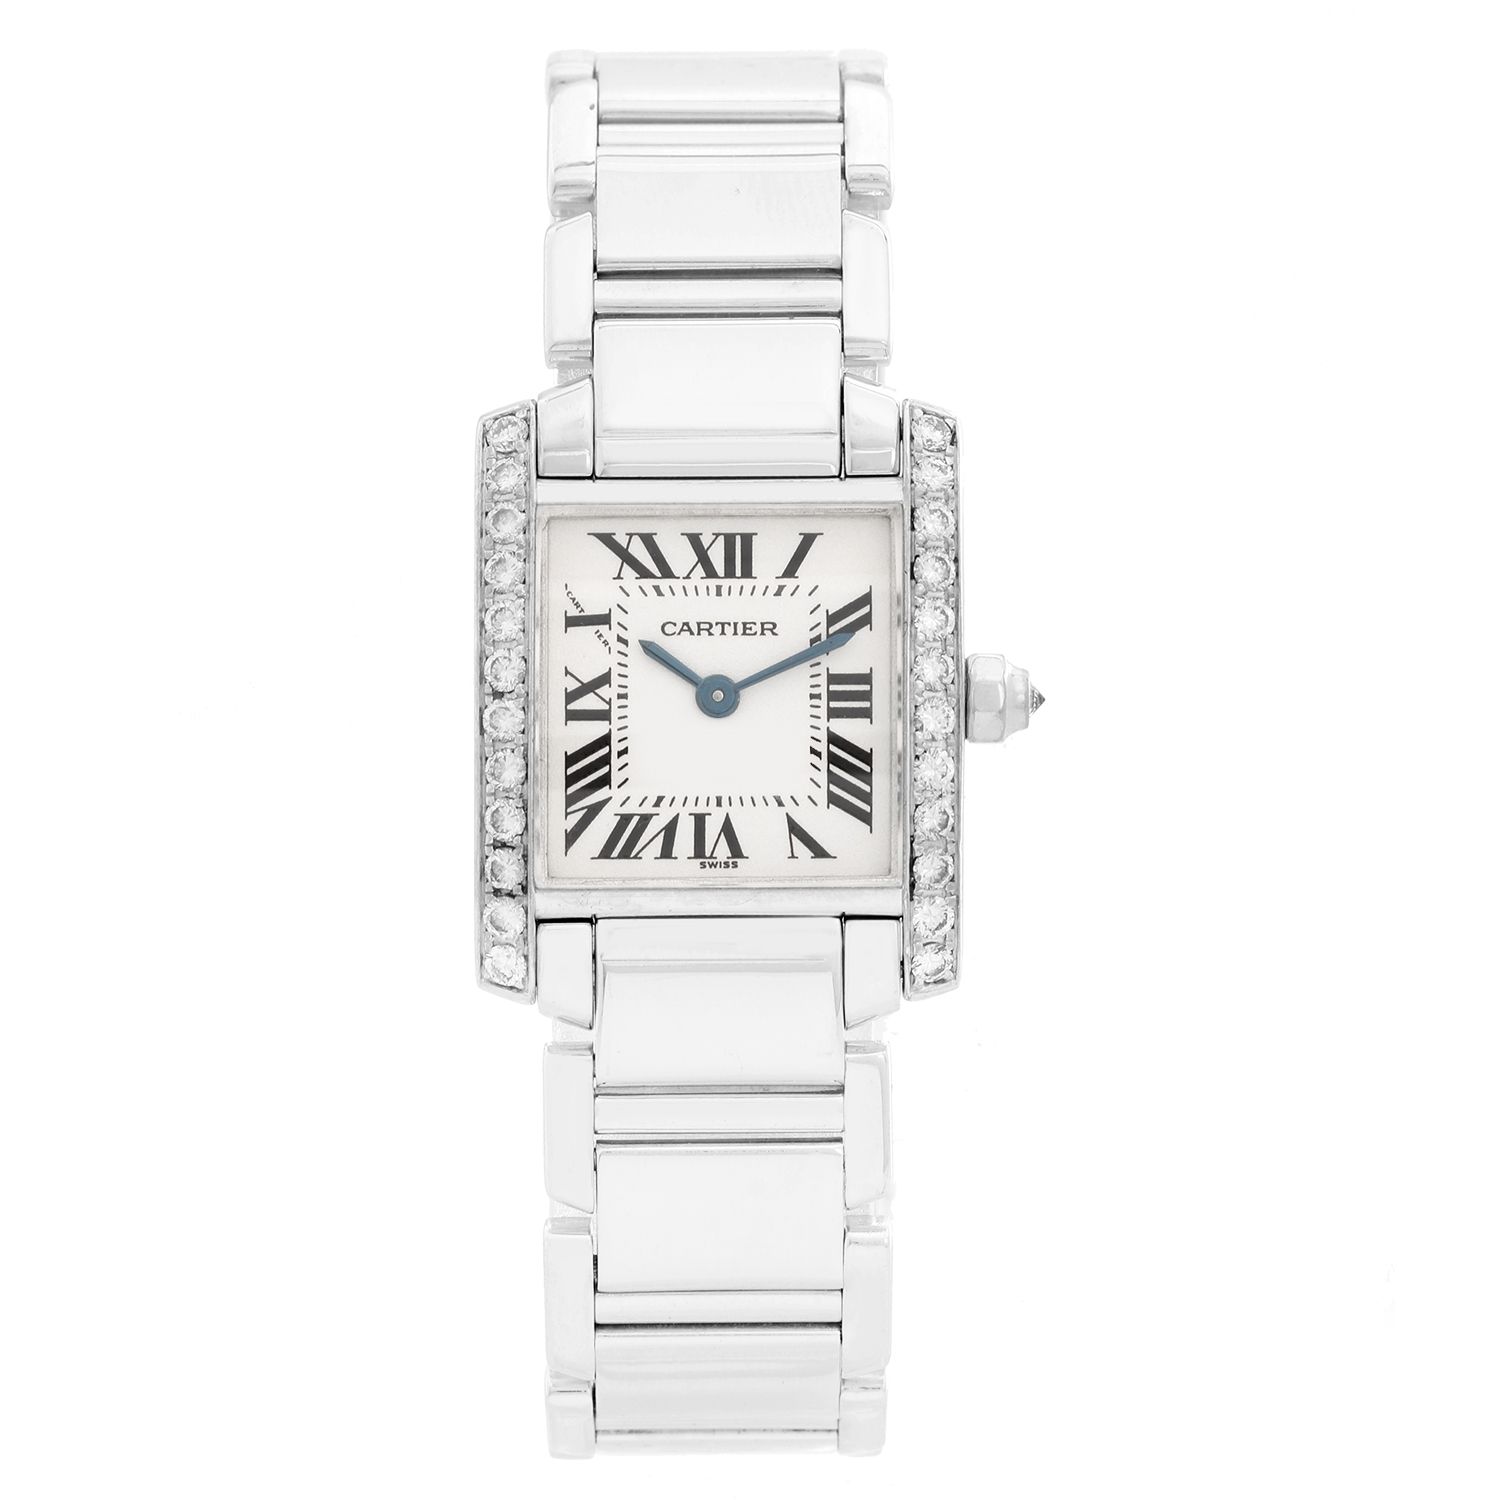 cartier tank francaise 18kt white gold diamond ladies watch we1002s3